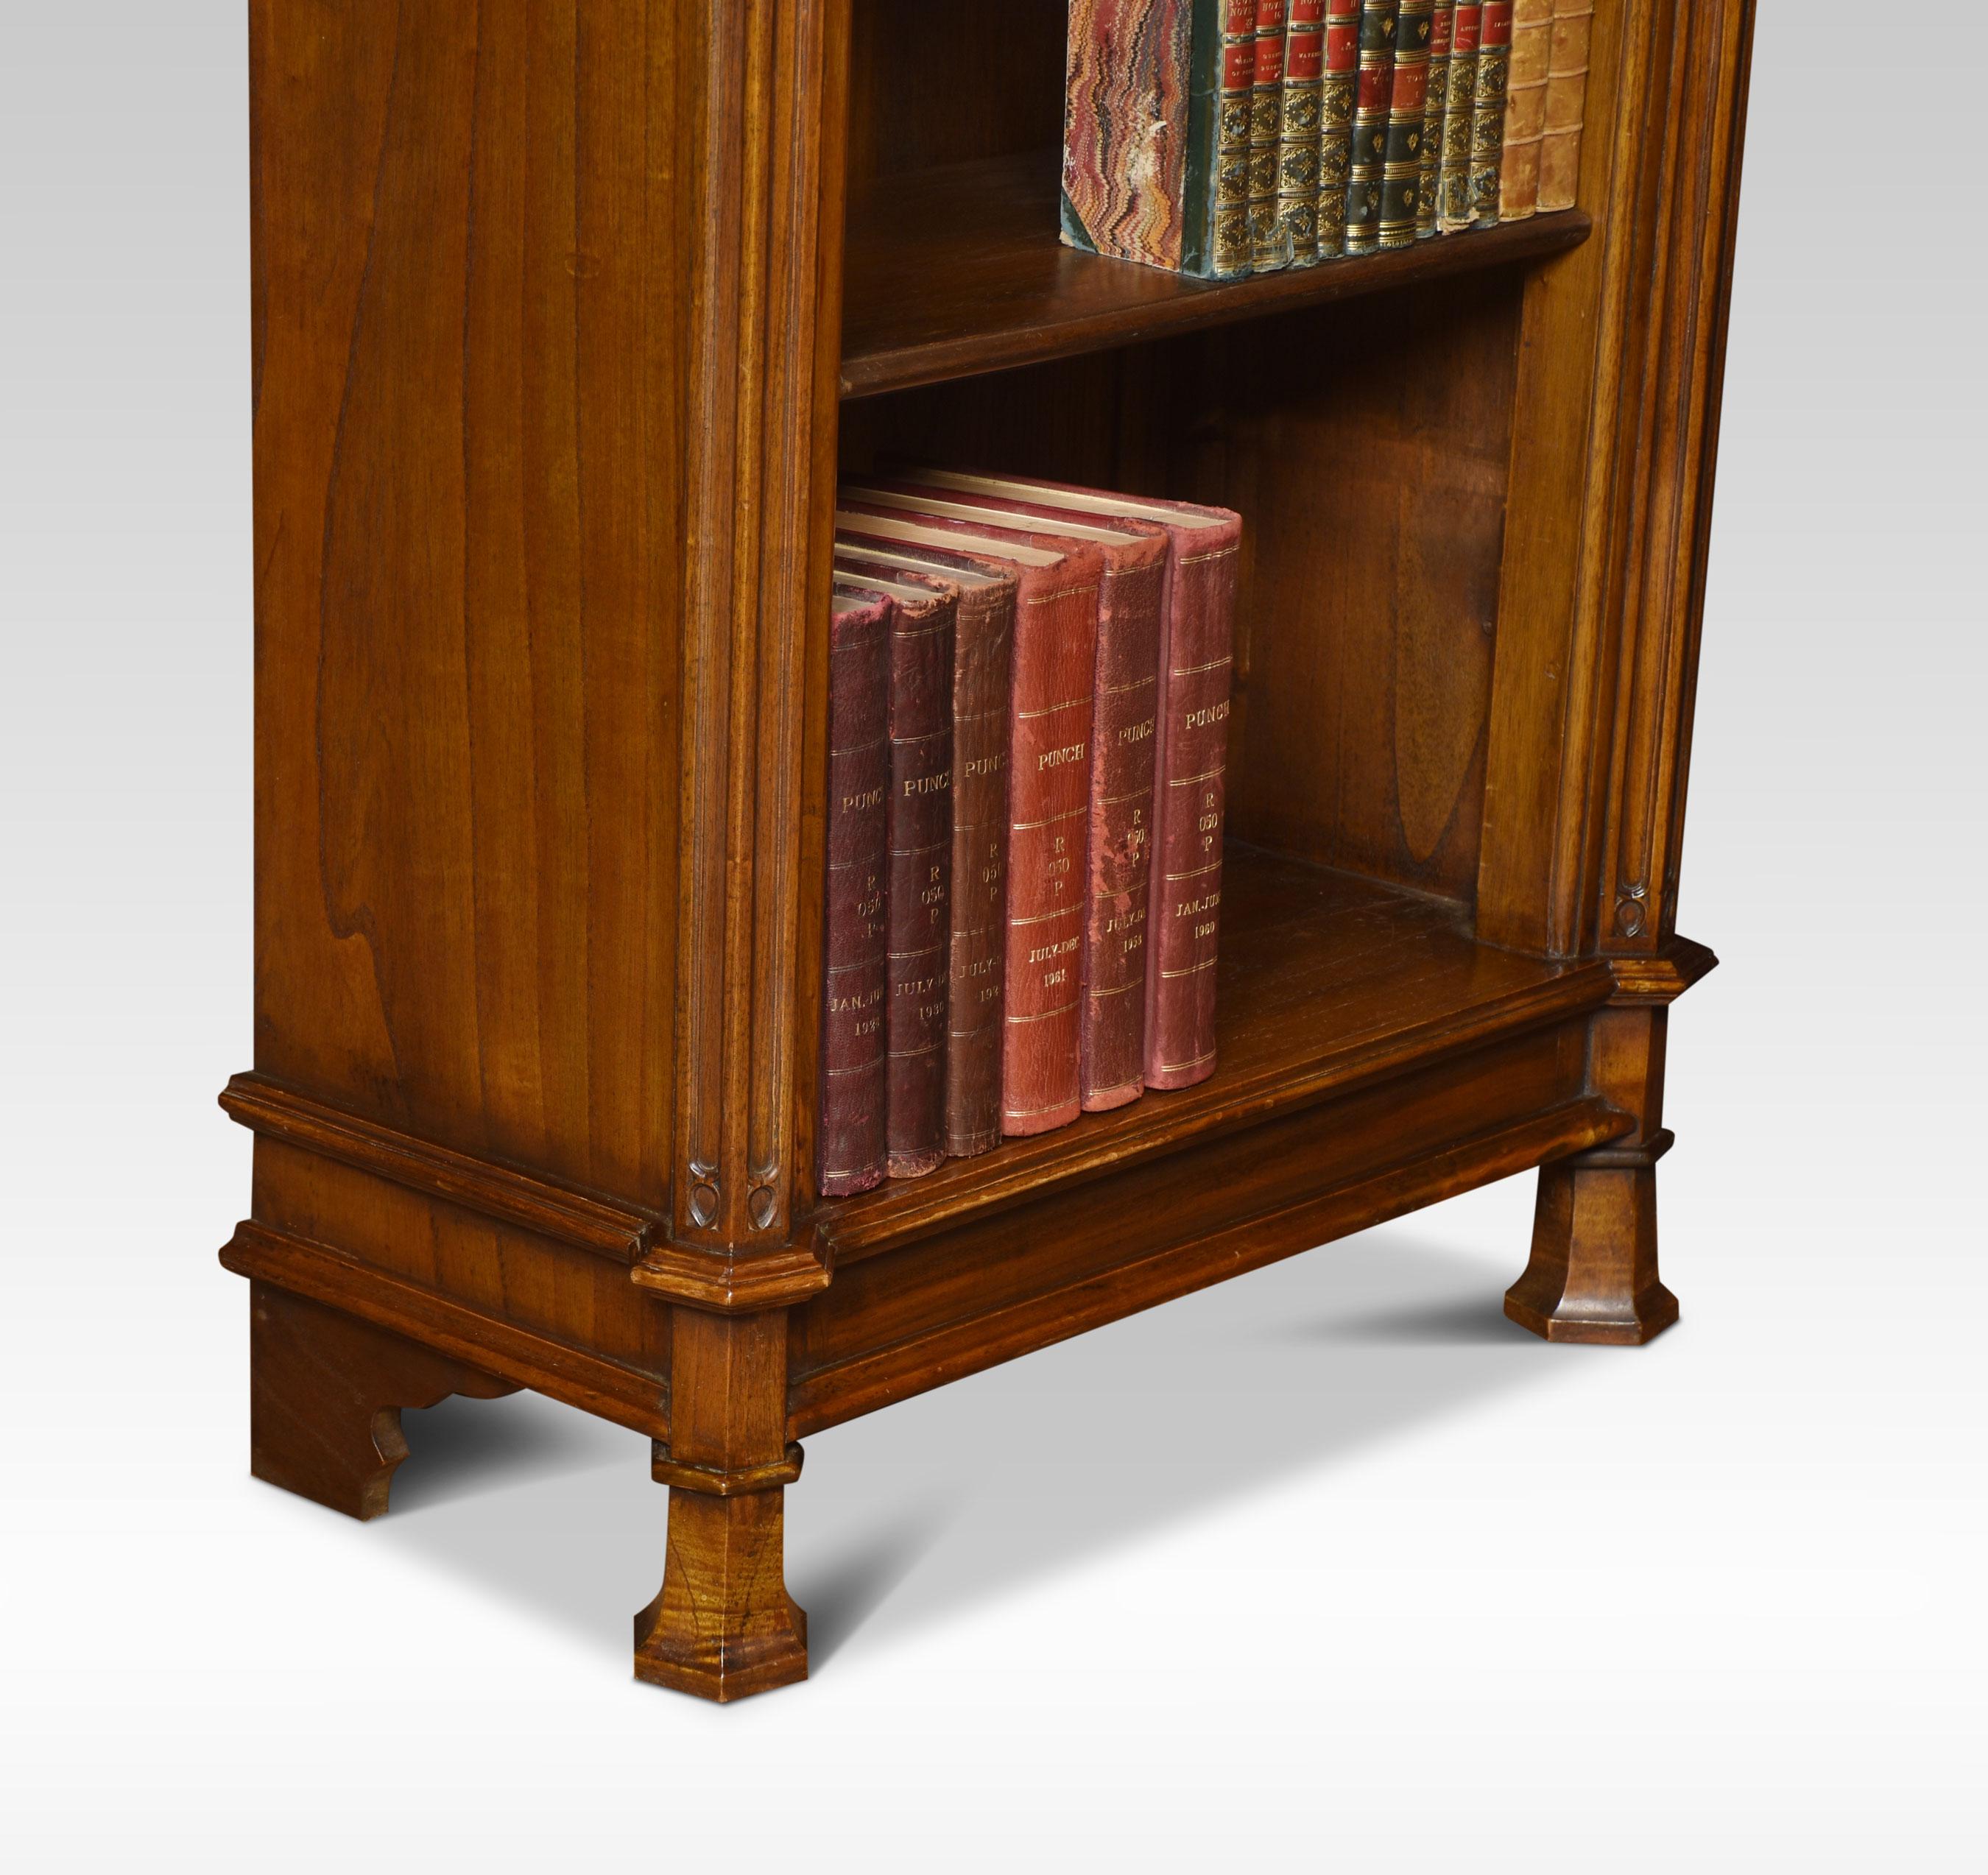 Gothic revival oak open bookcase, the architectural pediment above adjustable shelved interior, flanked by moulded columns. All raised up on stylised feet.
Dimensions
Height 82 inches
Width 28 inches
Depth 15.5 inches.